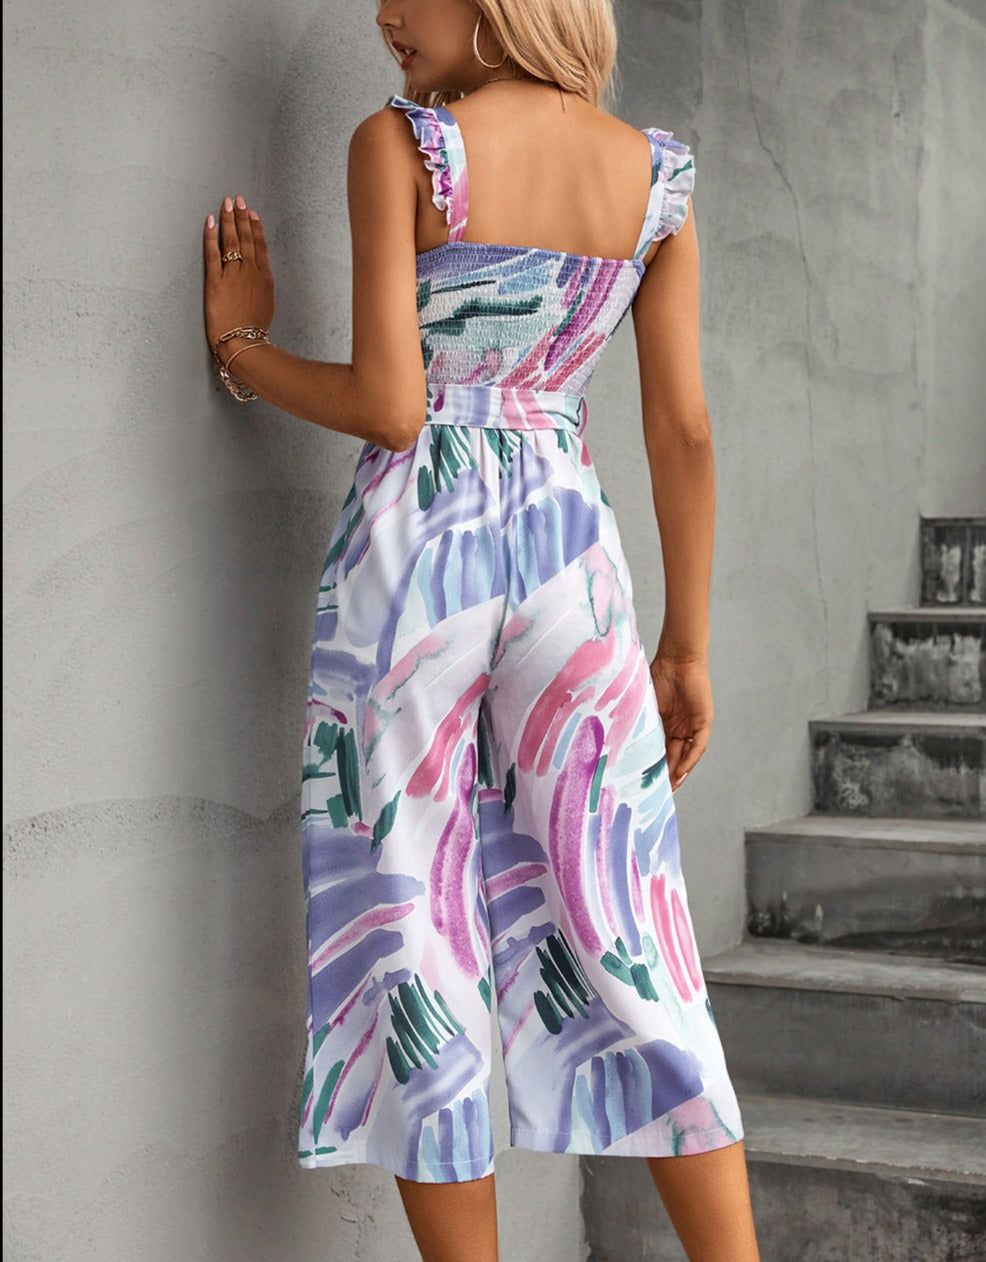 Floral Sleeve Jumpsuit with Flying Sleeves and Belt